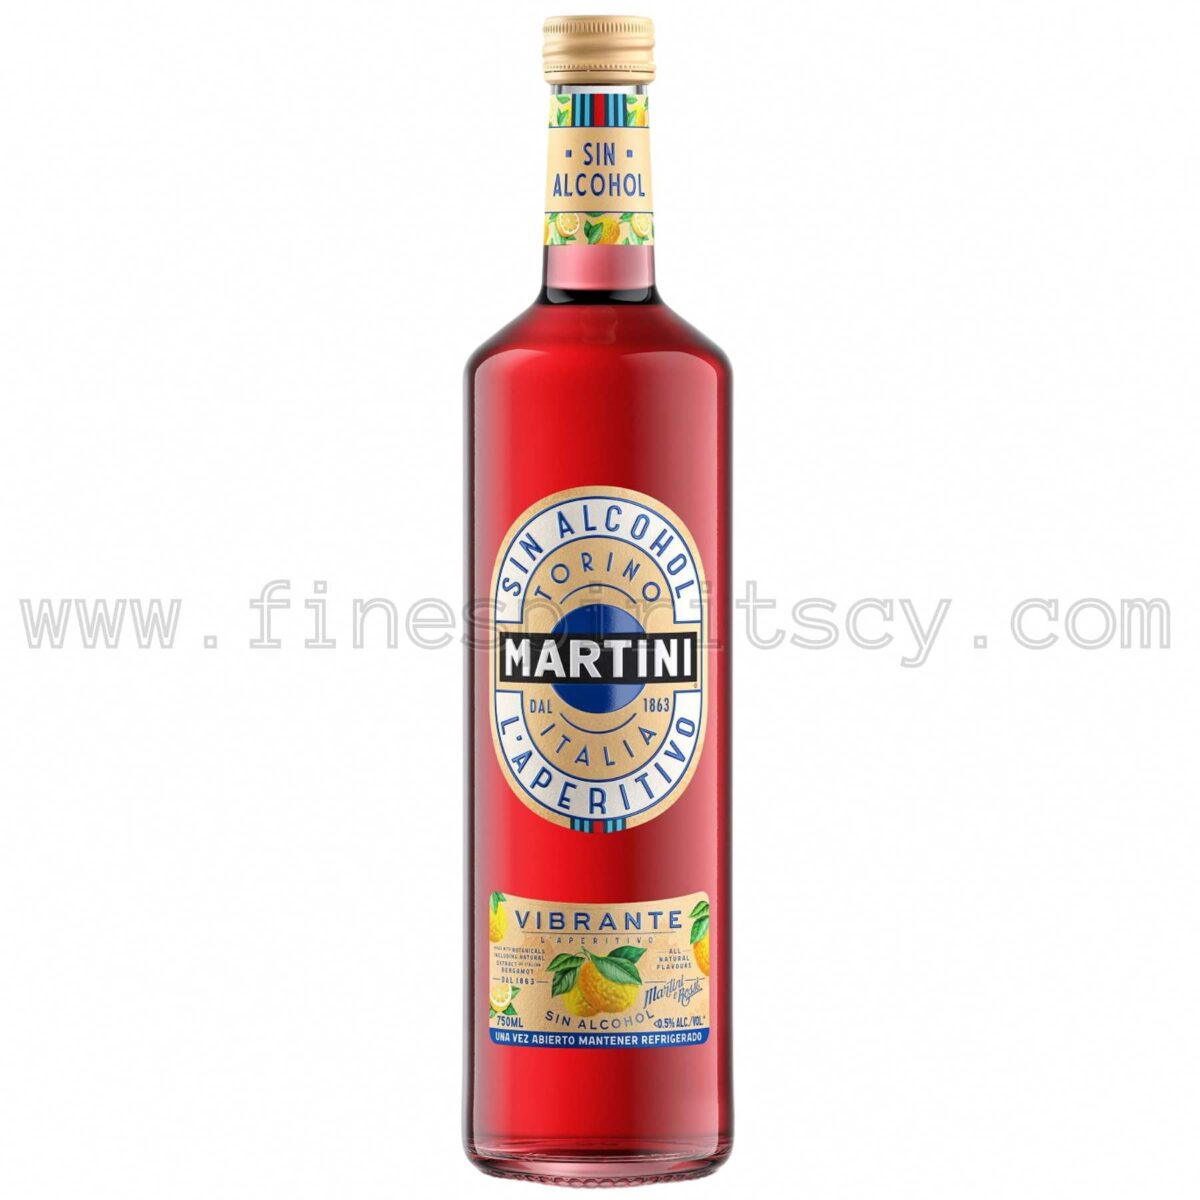 Martini Vibrante Alcohol Free 0% Cyprus Price Shop Buy Order Online Cyprus CY